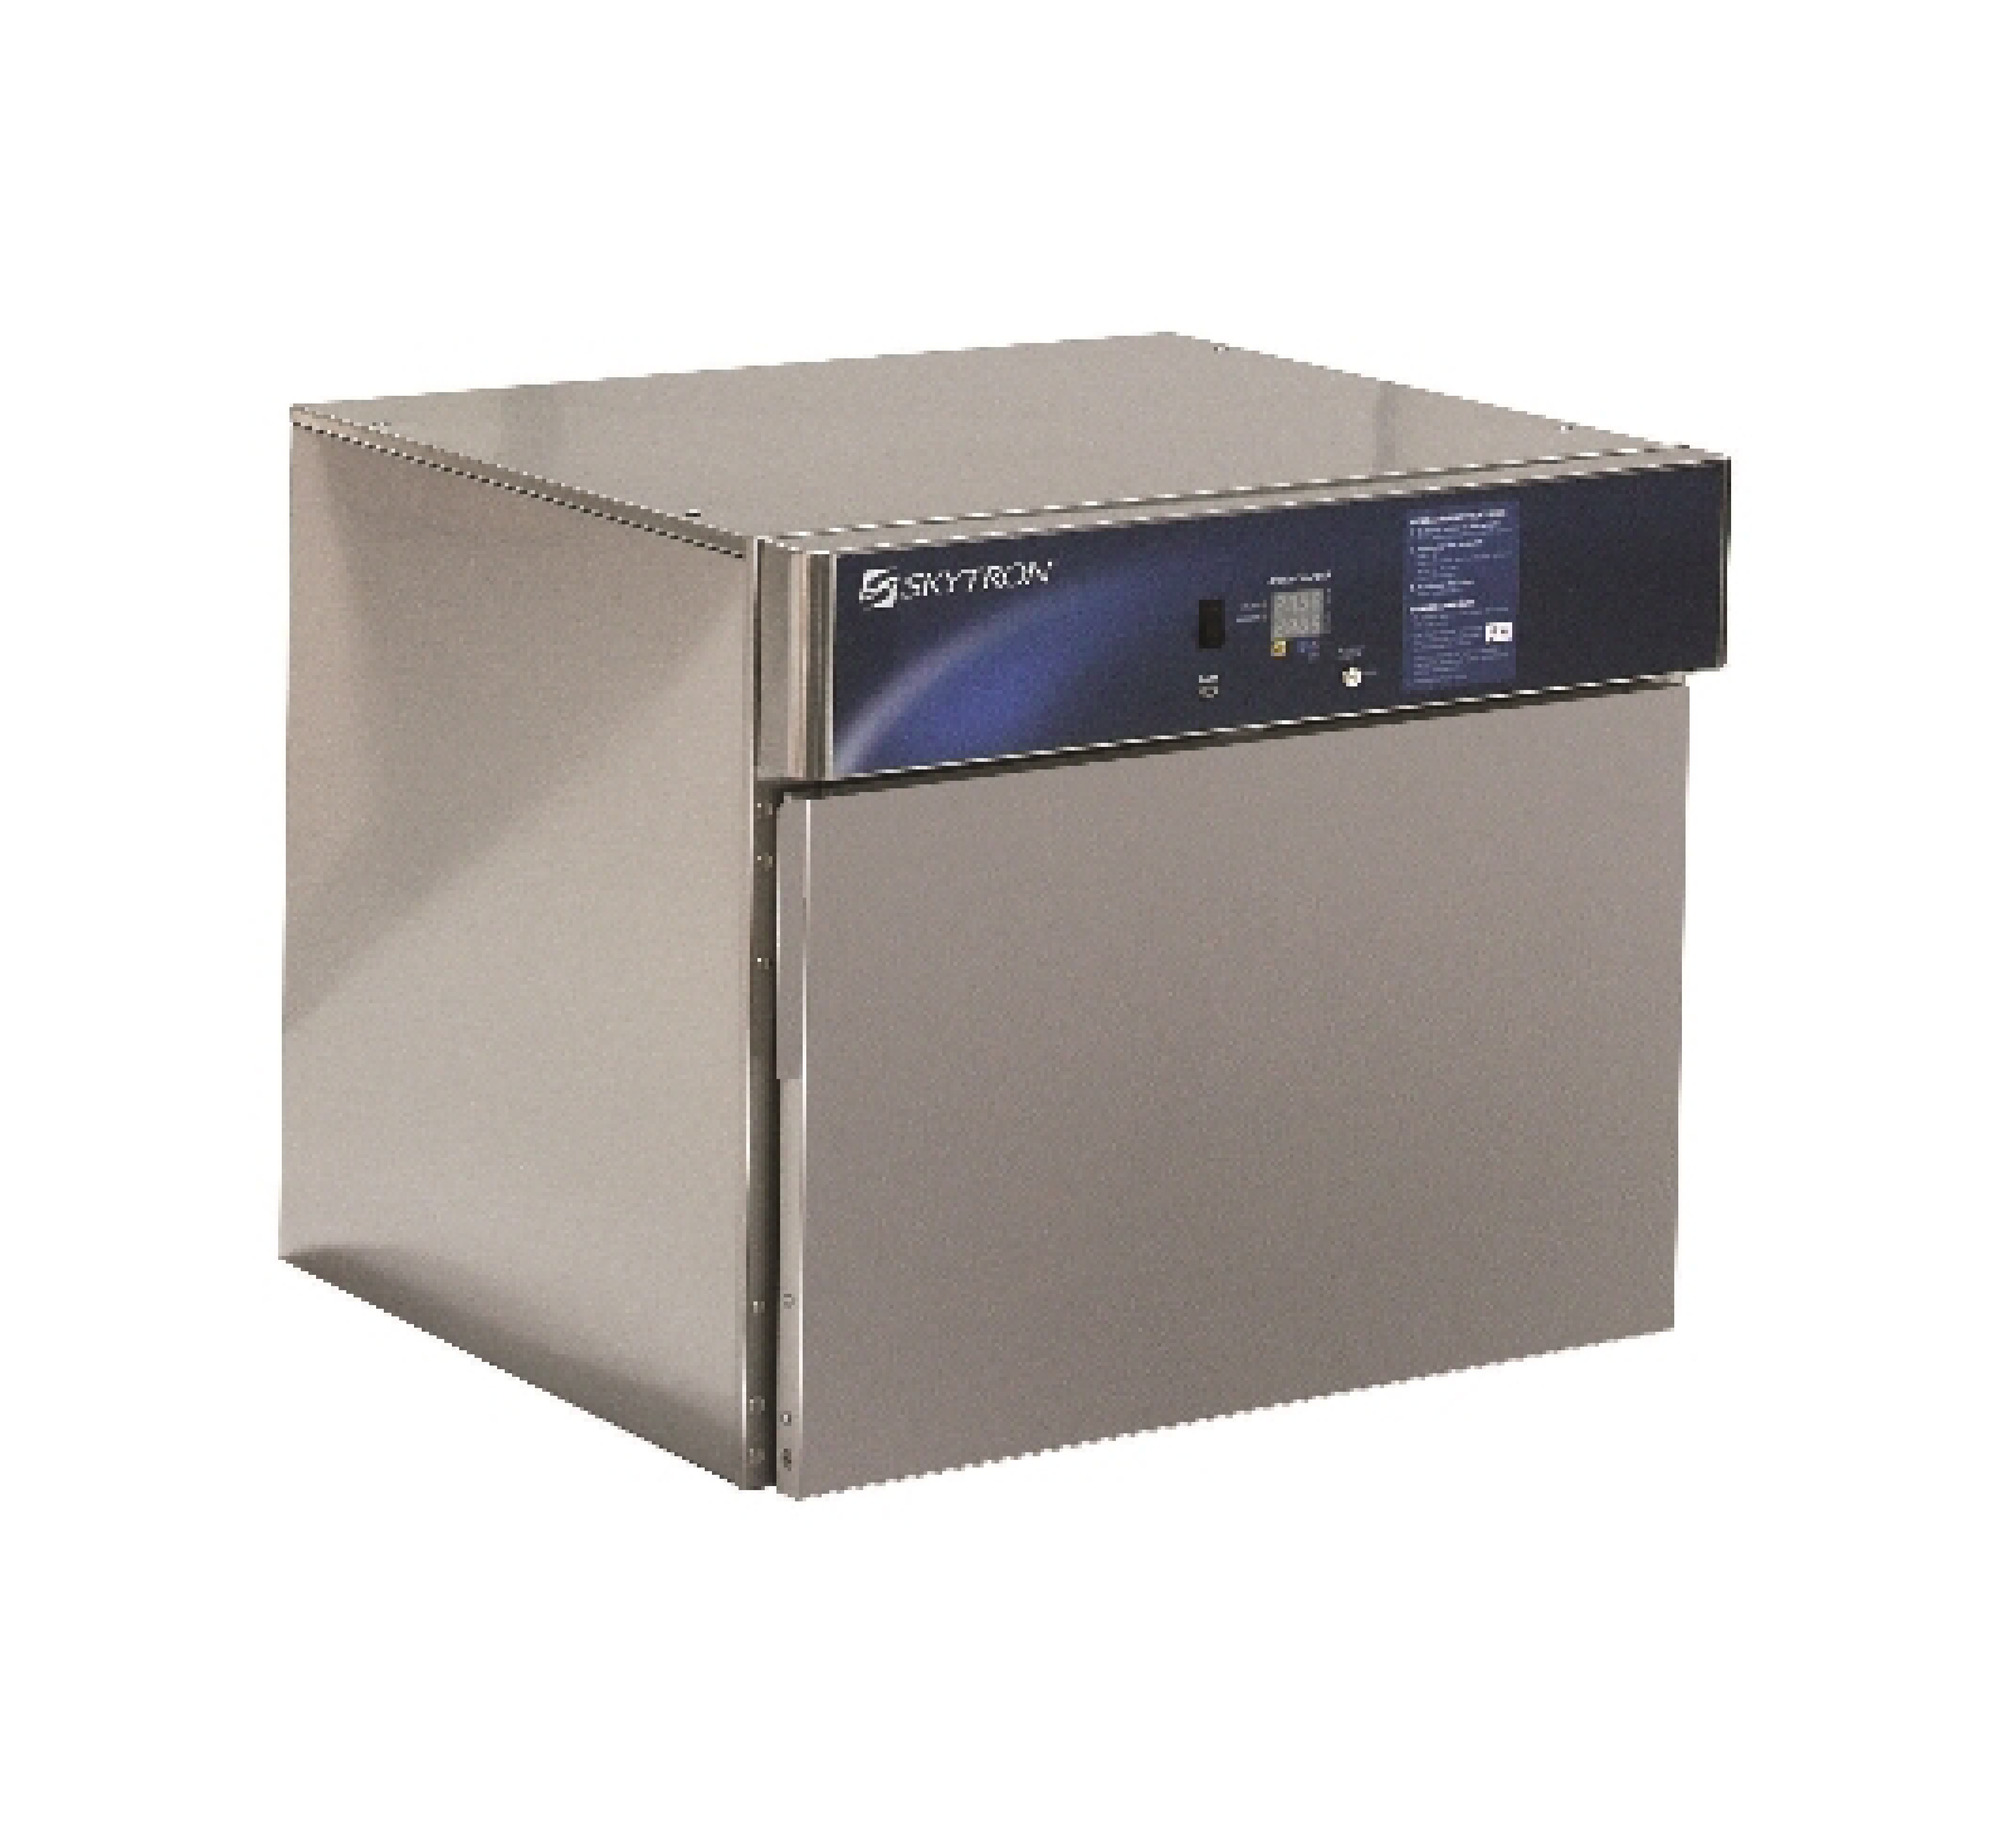 Warming Cabinet single compartment, countertop with stainless steel door